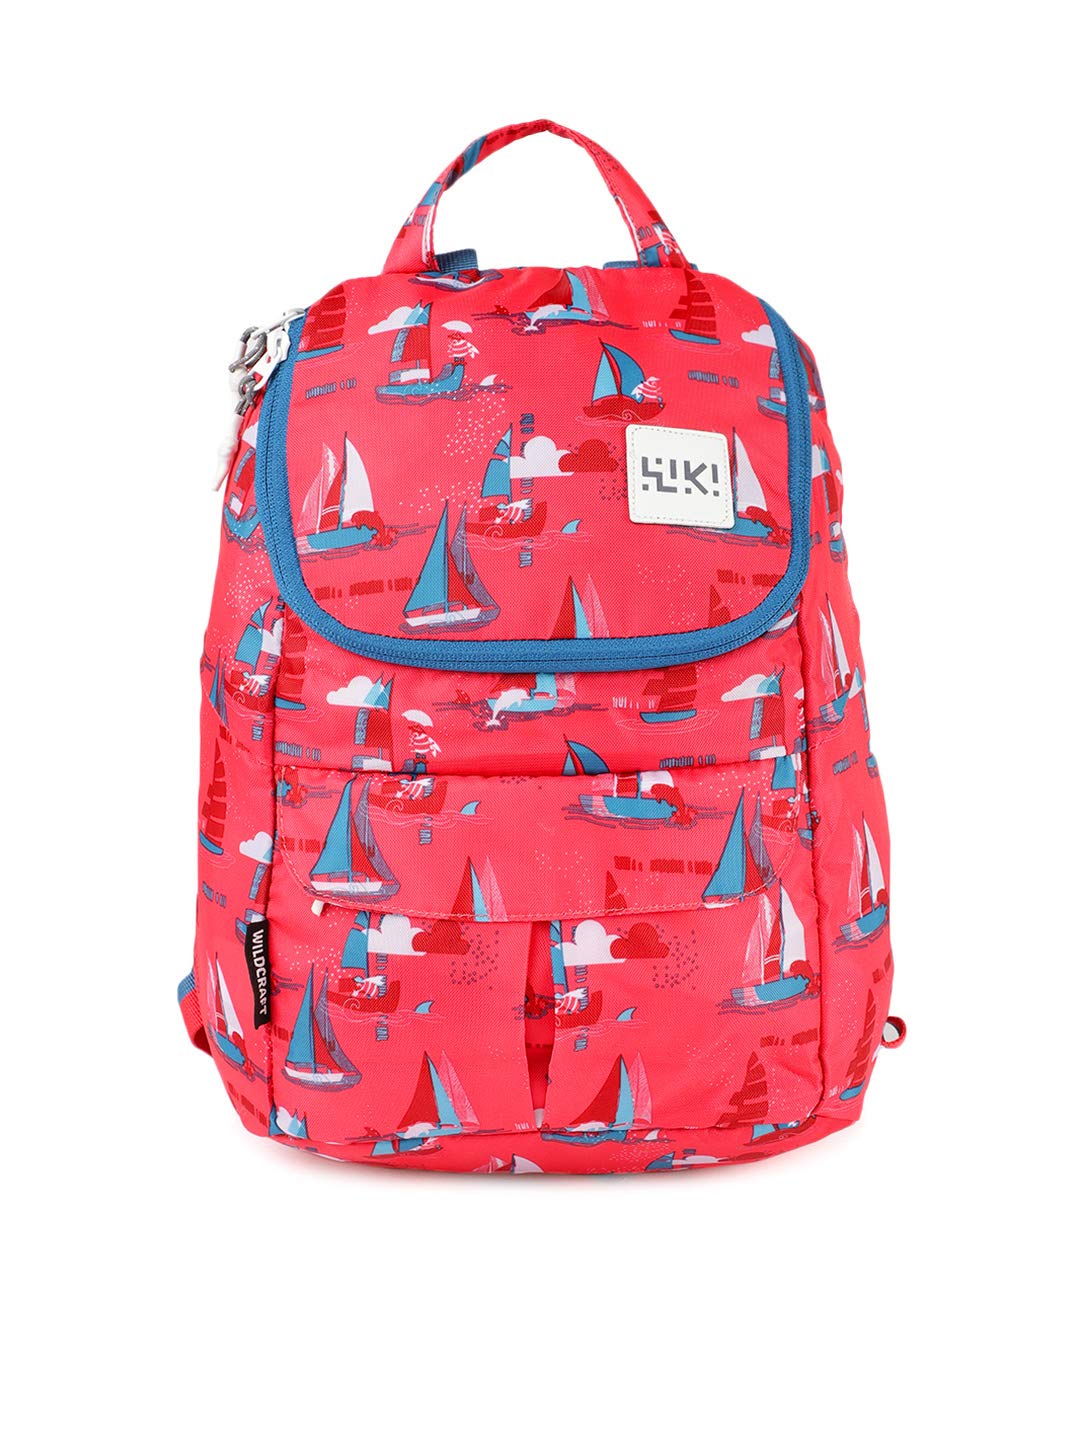 Wildcraft Mini 1 Backpack 13 Inches Sailor Red